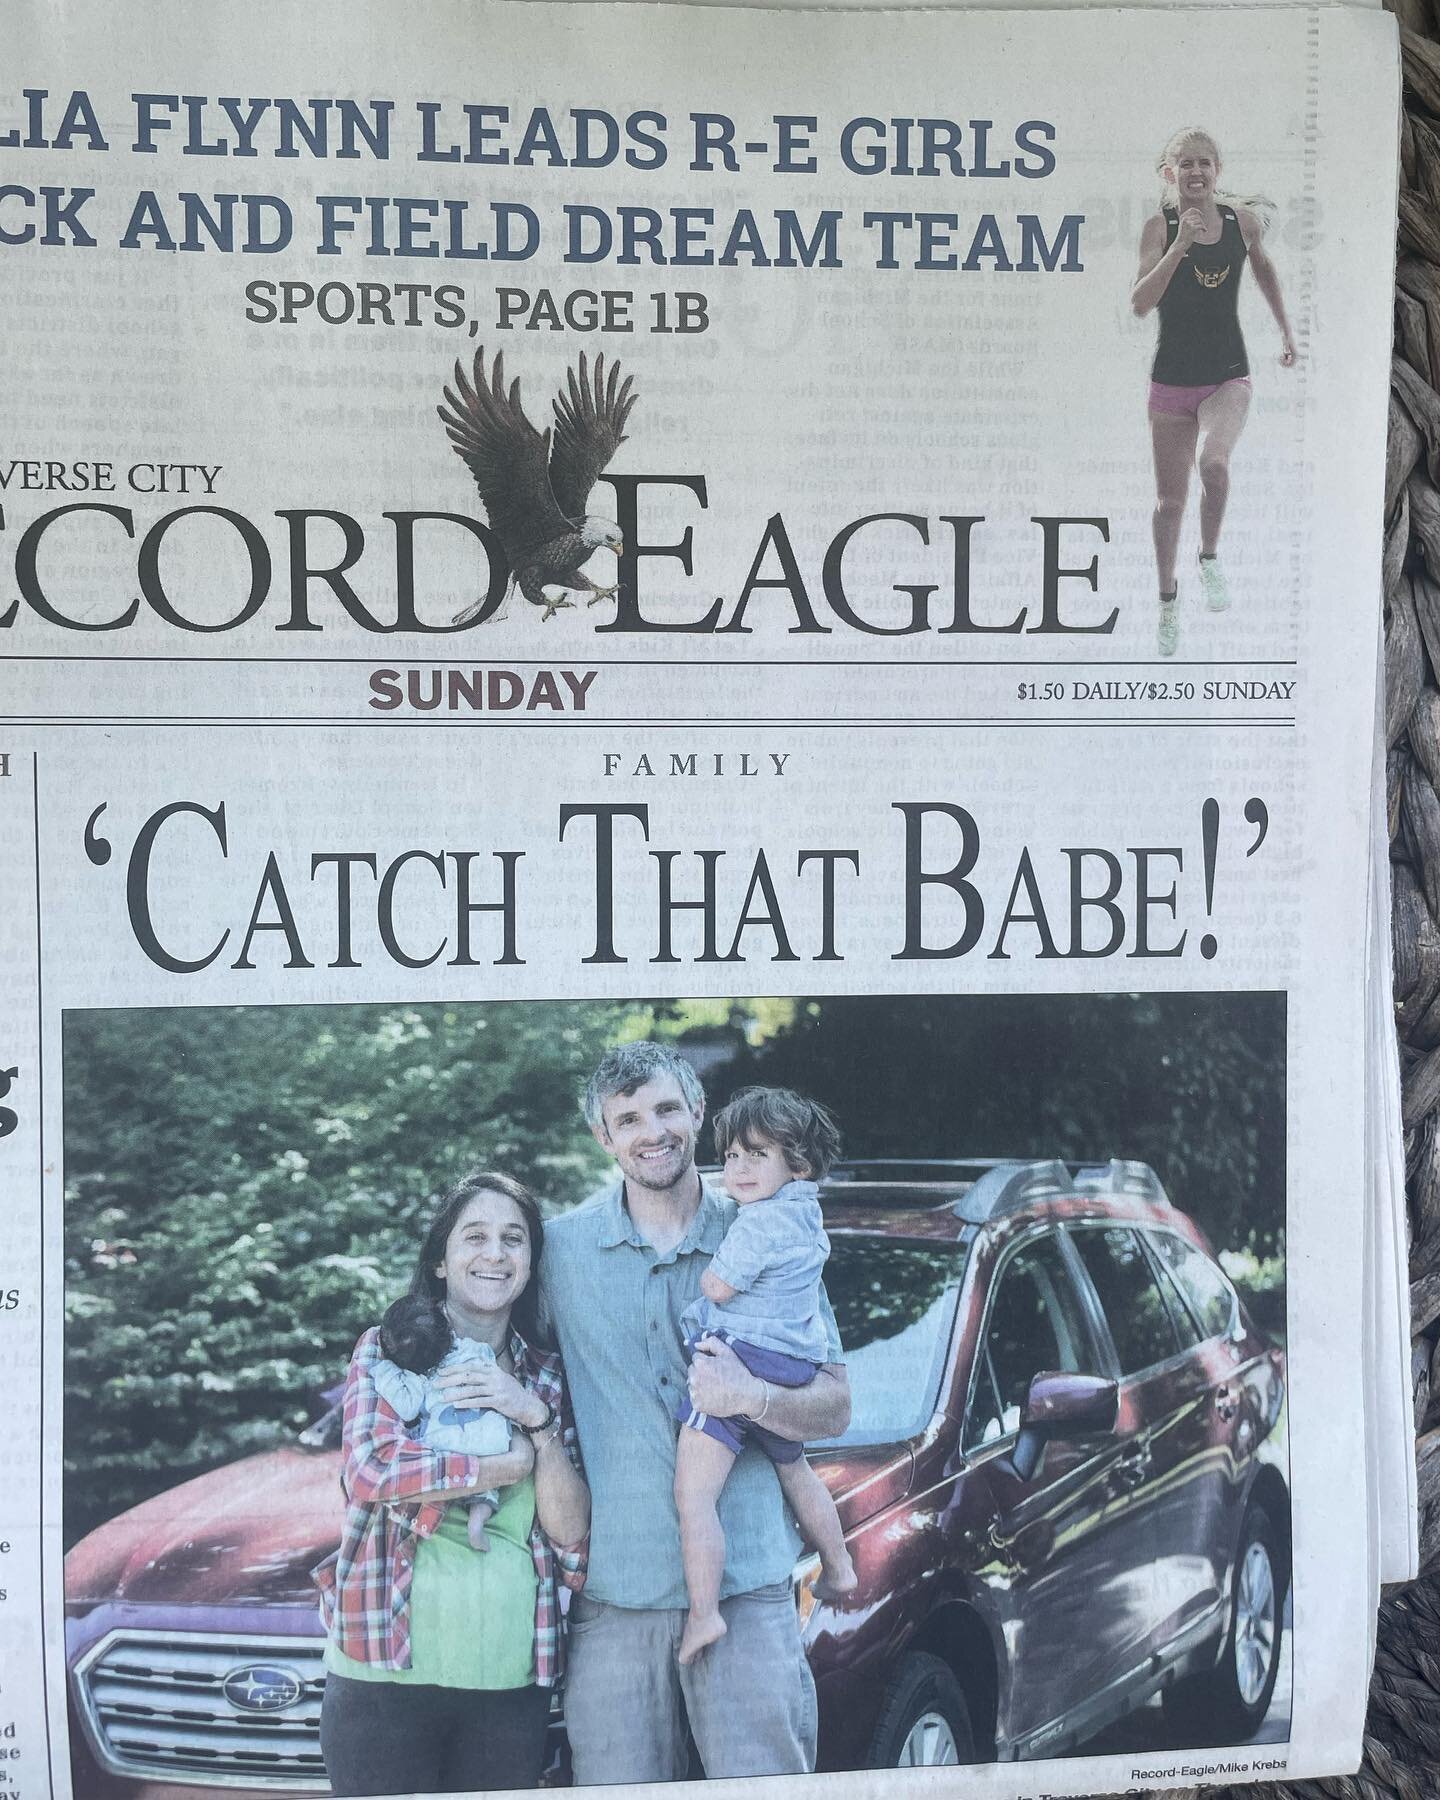 A birth announcement of sorts.

Lots of folks have reached out after reading the record eagle yesterday. 

My sweet friend Hanna had an unexpected car birth in the middle of Cherry Fest and FaceTimed me to help her through!

A good reminder that babi